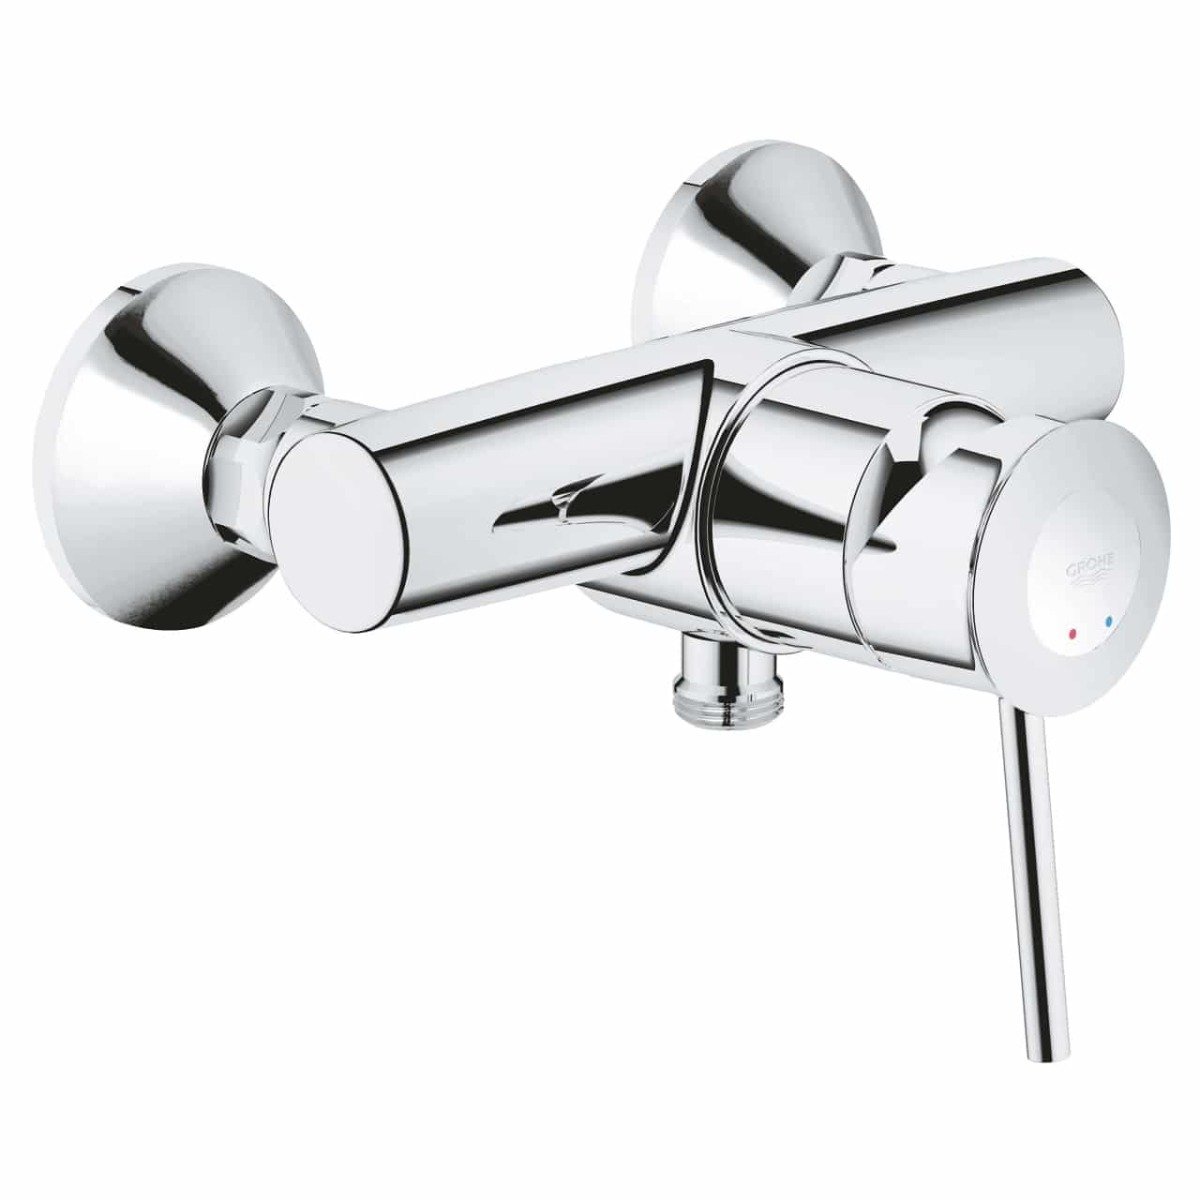 Baterie baie cabina dus Grohe Start Classic,montare pe perete, crom-23786000 baterii-lux